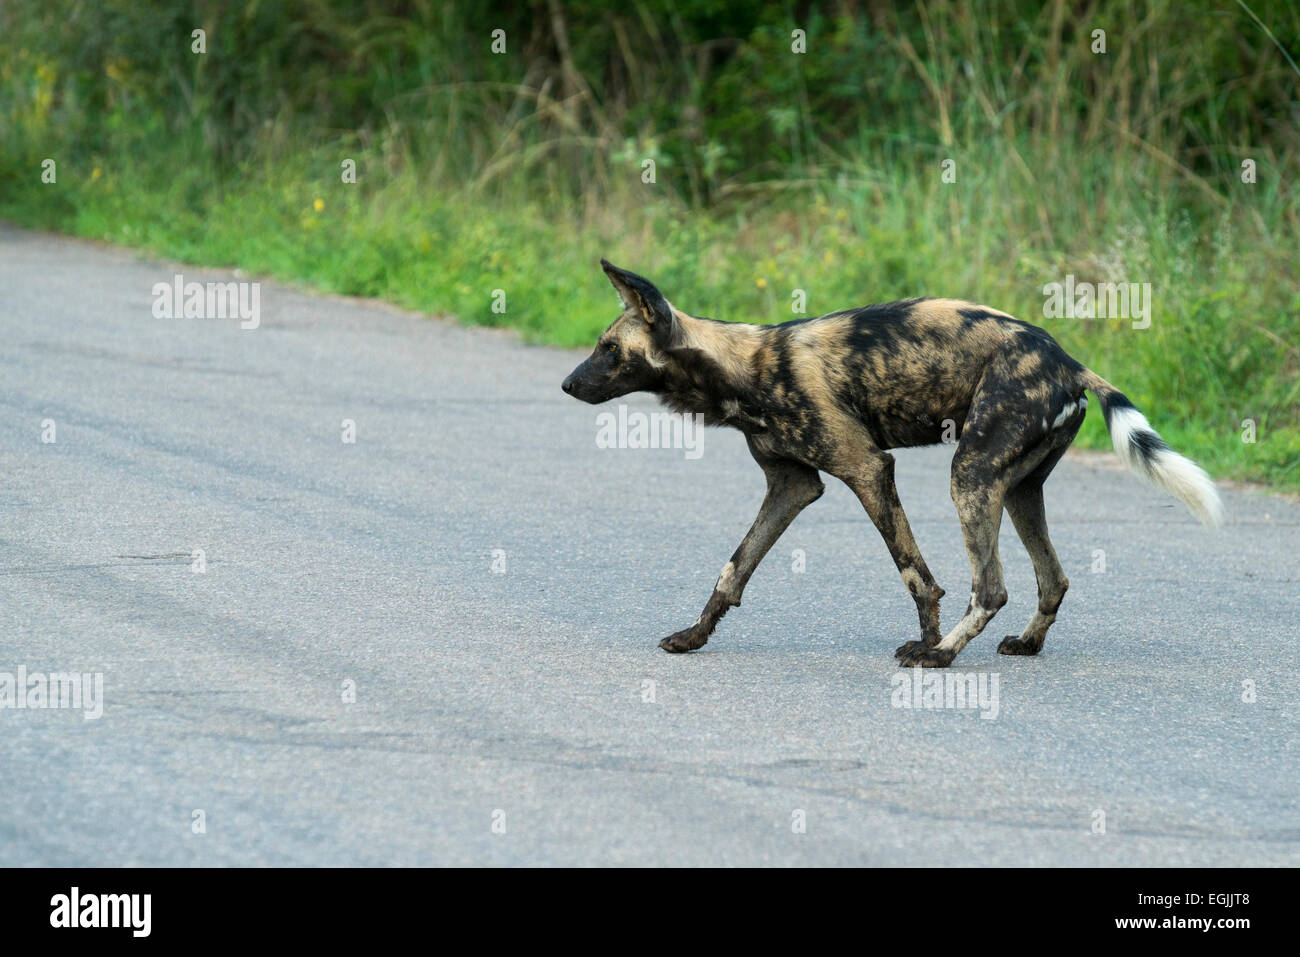 African wild dog (Lycaon pictus), Kruger National Park, Sud Africa Foto Stock